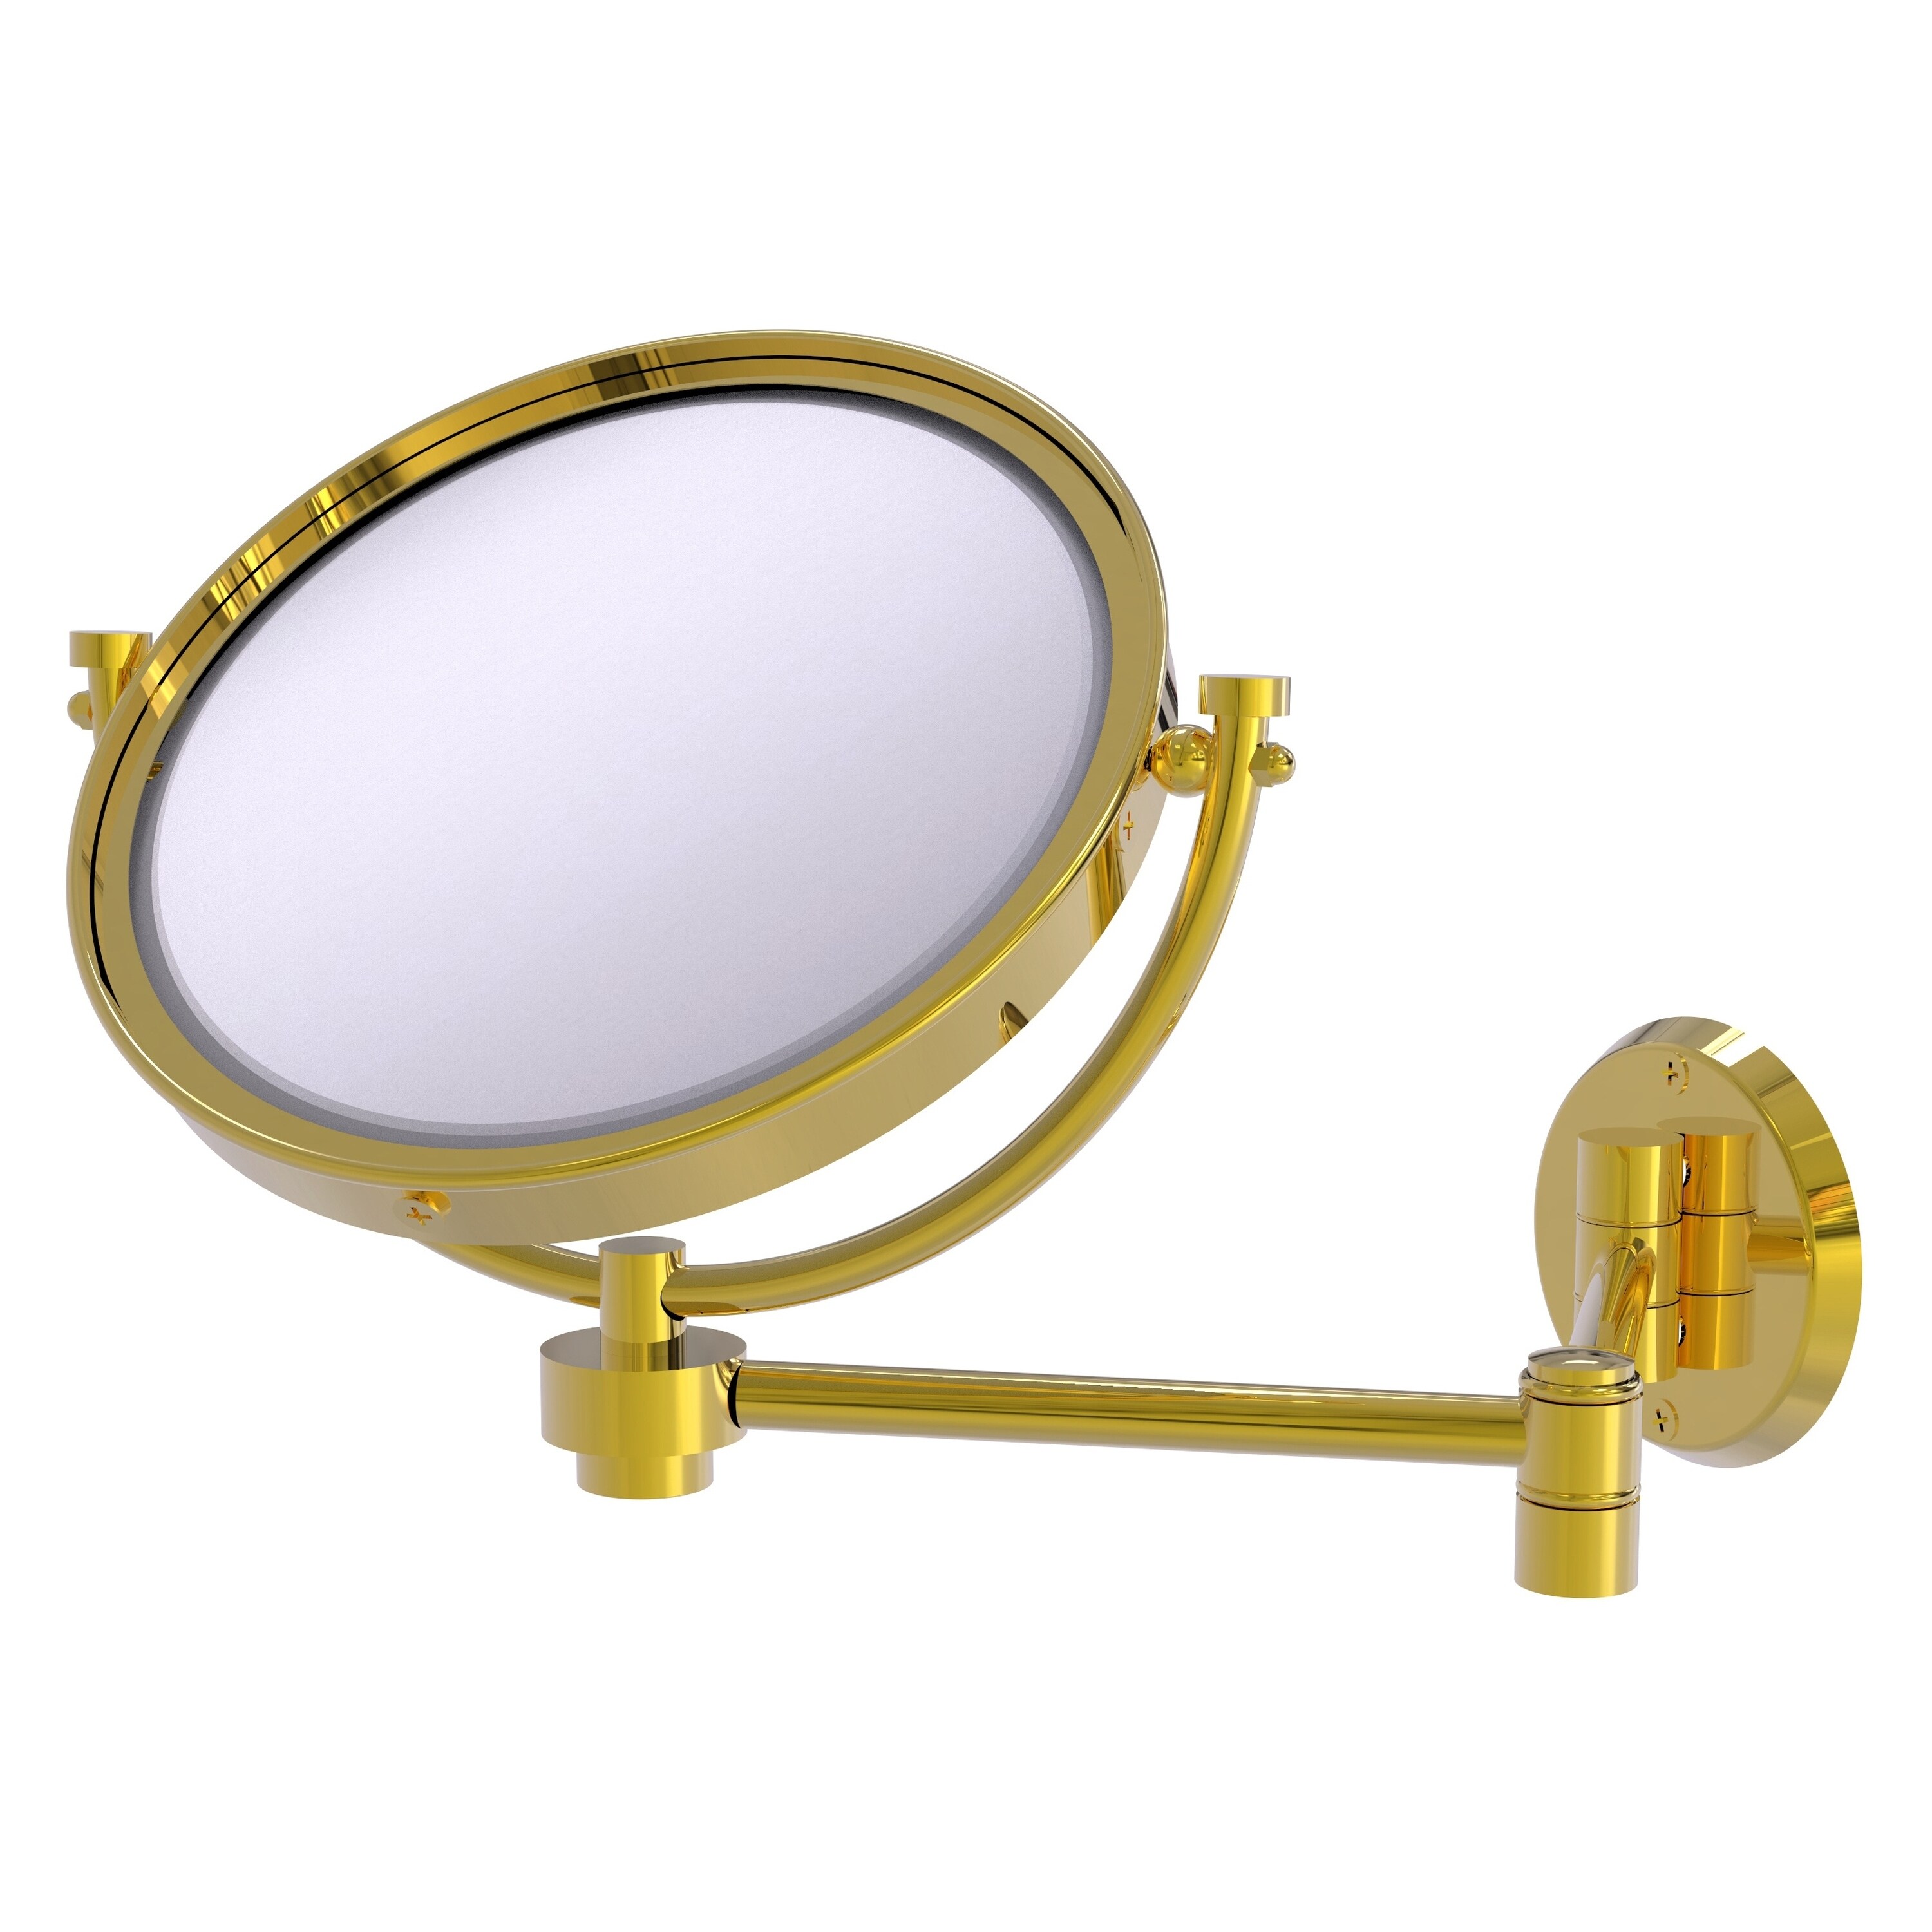 8-in x 10-in Polished Silver Double-sided 3X Magnifying Wall-mounted Vanity Mirror | - Allied Brass WM-6/3X-PB